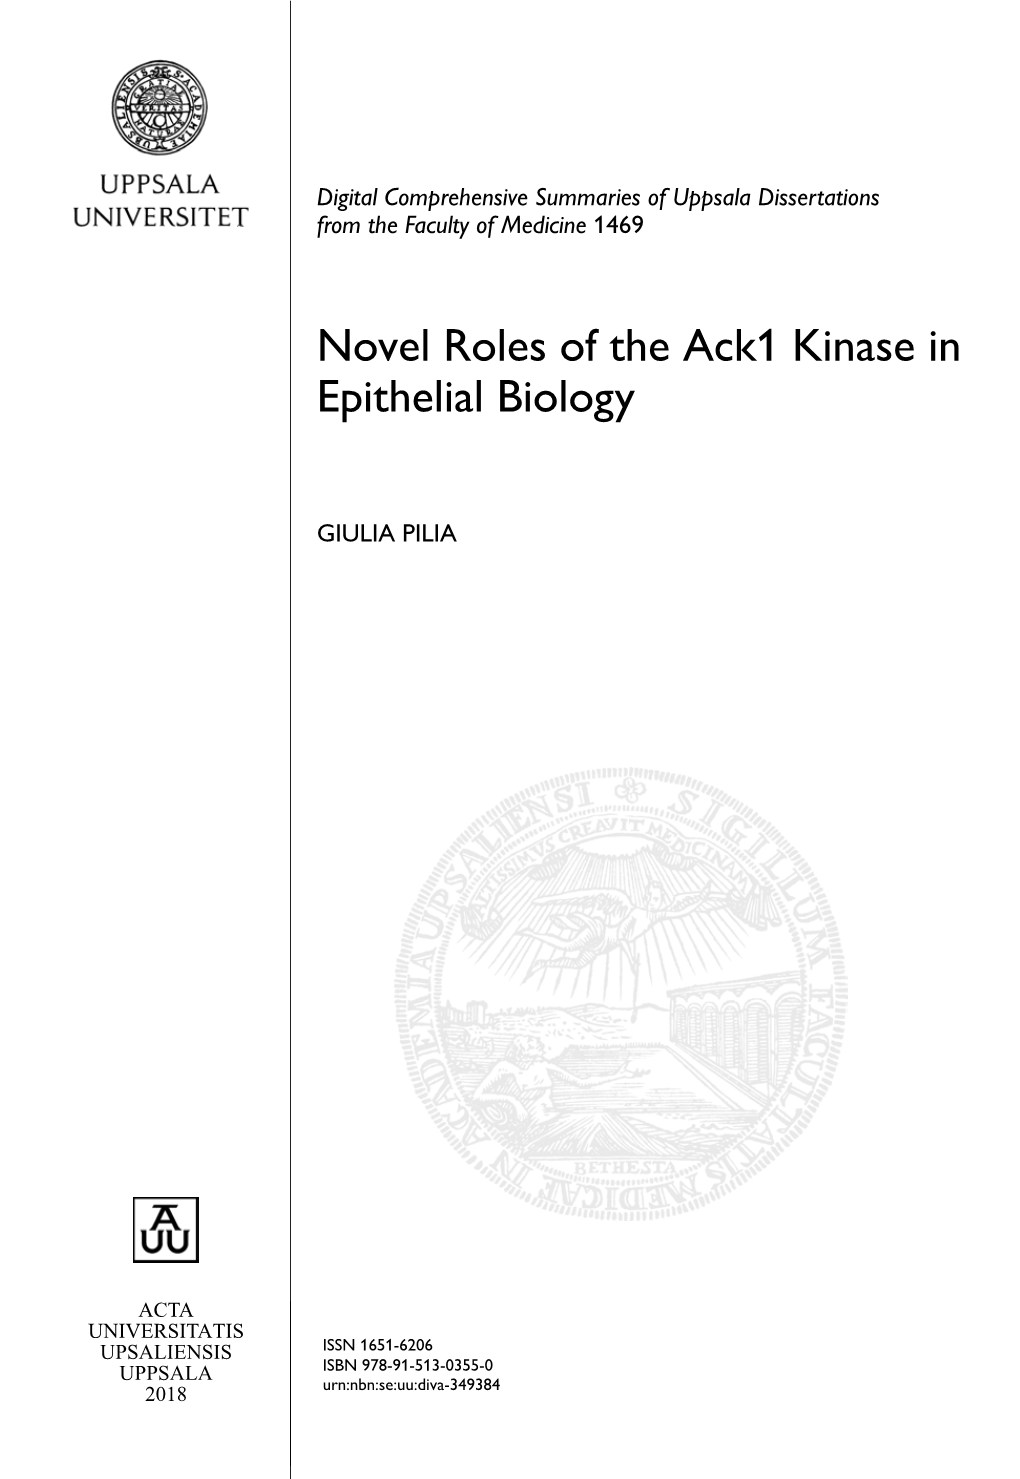 Novel Roles of the Ack1 Kinase in Epithelial Biology